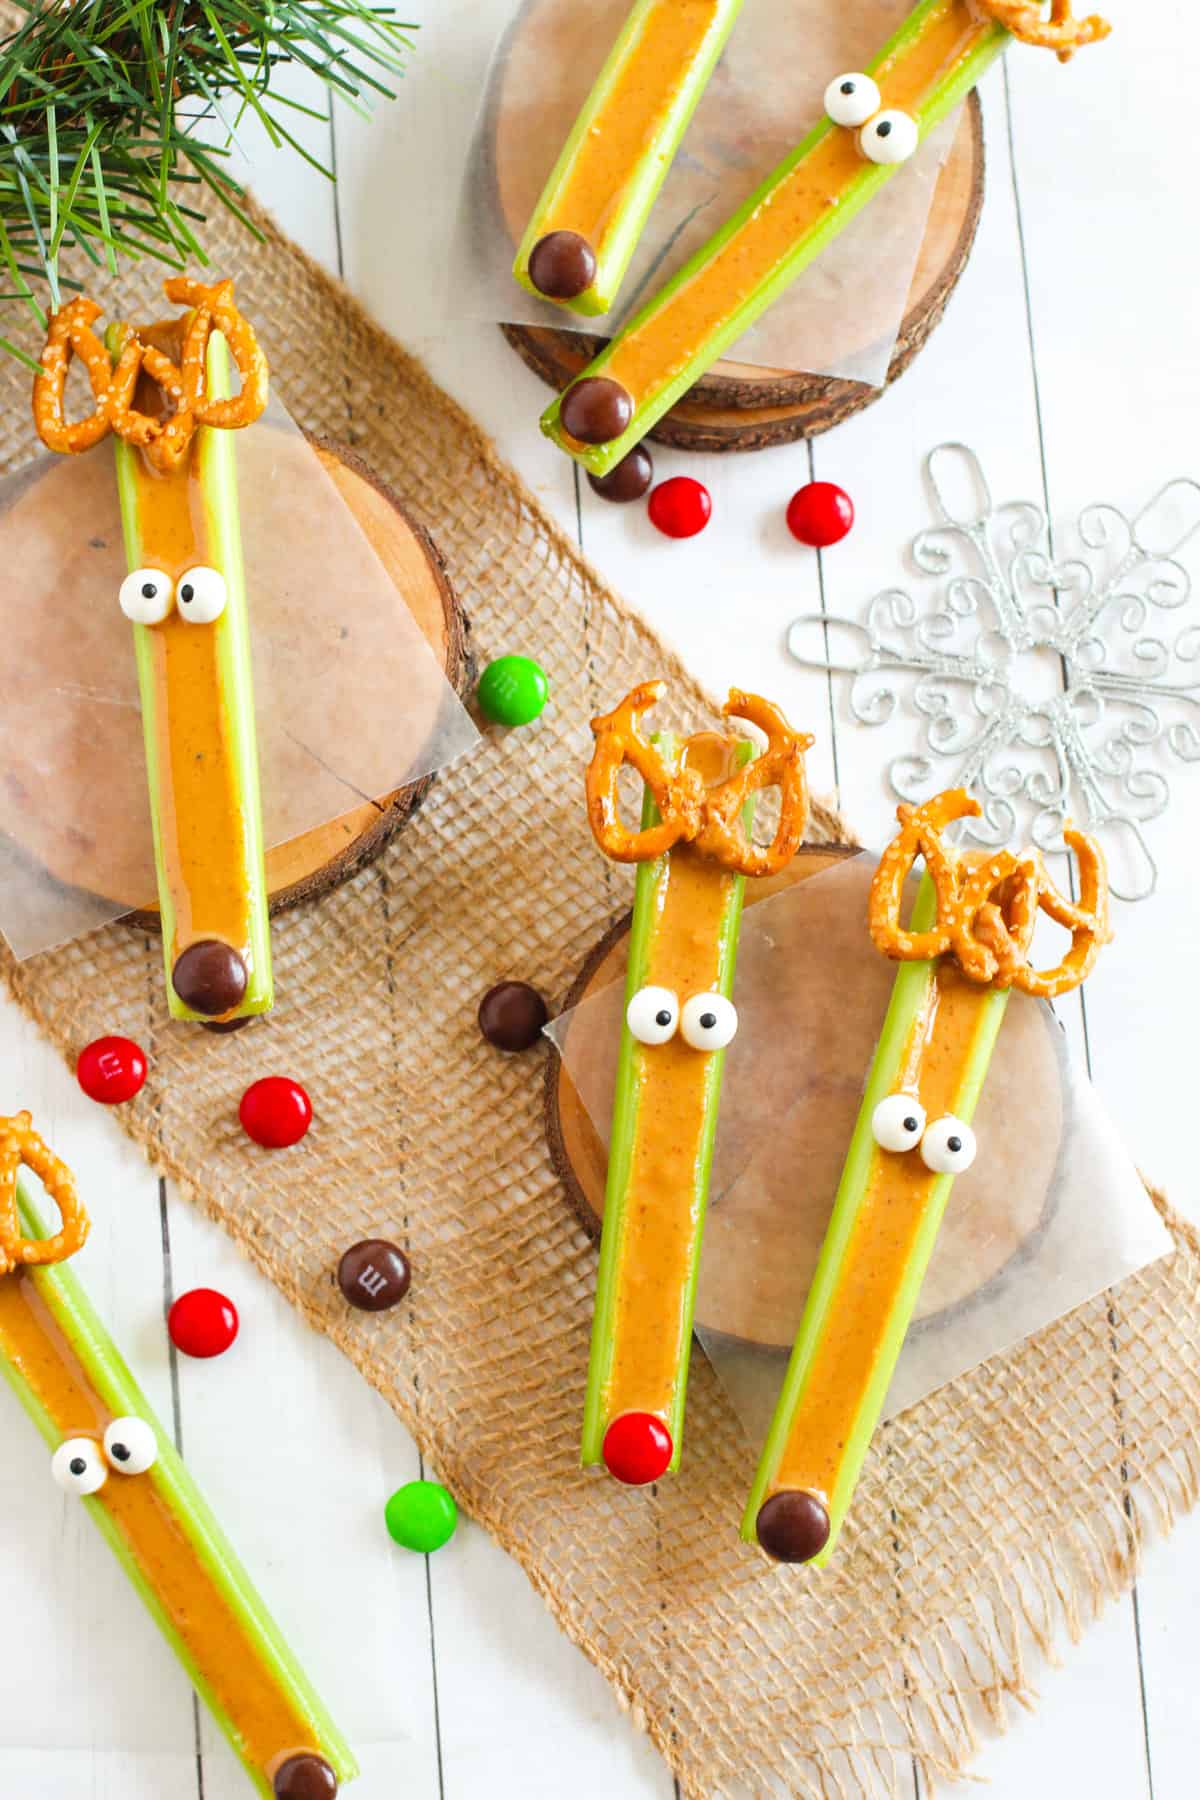 Reindeer celery sticks with peanut butter filling, pretzel antlers,candy eyes, and M&M candy noses.